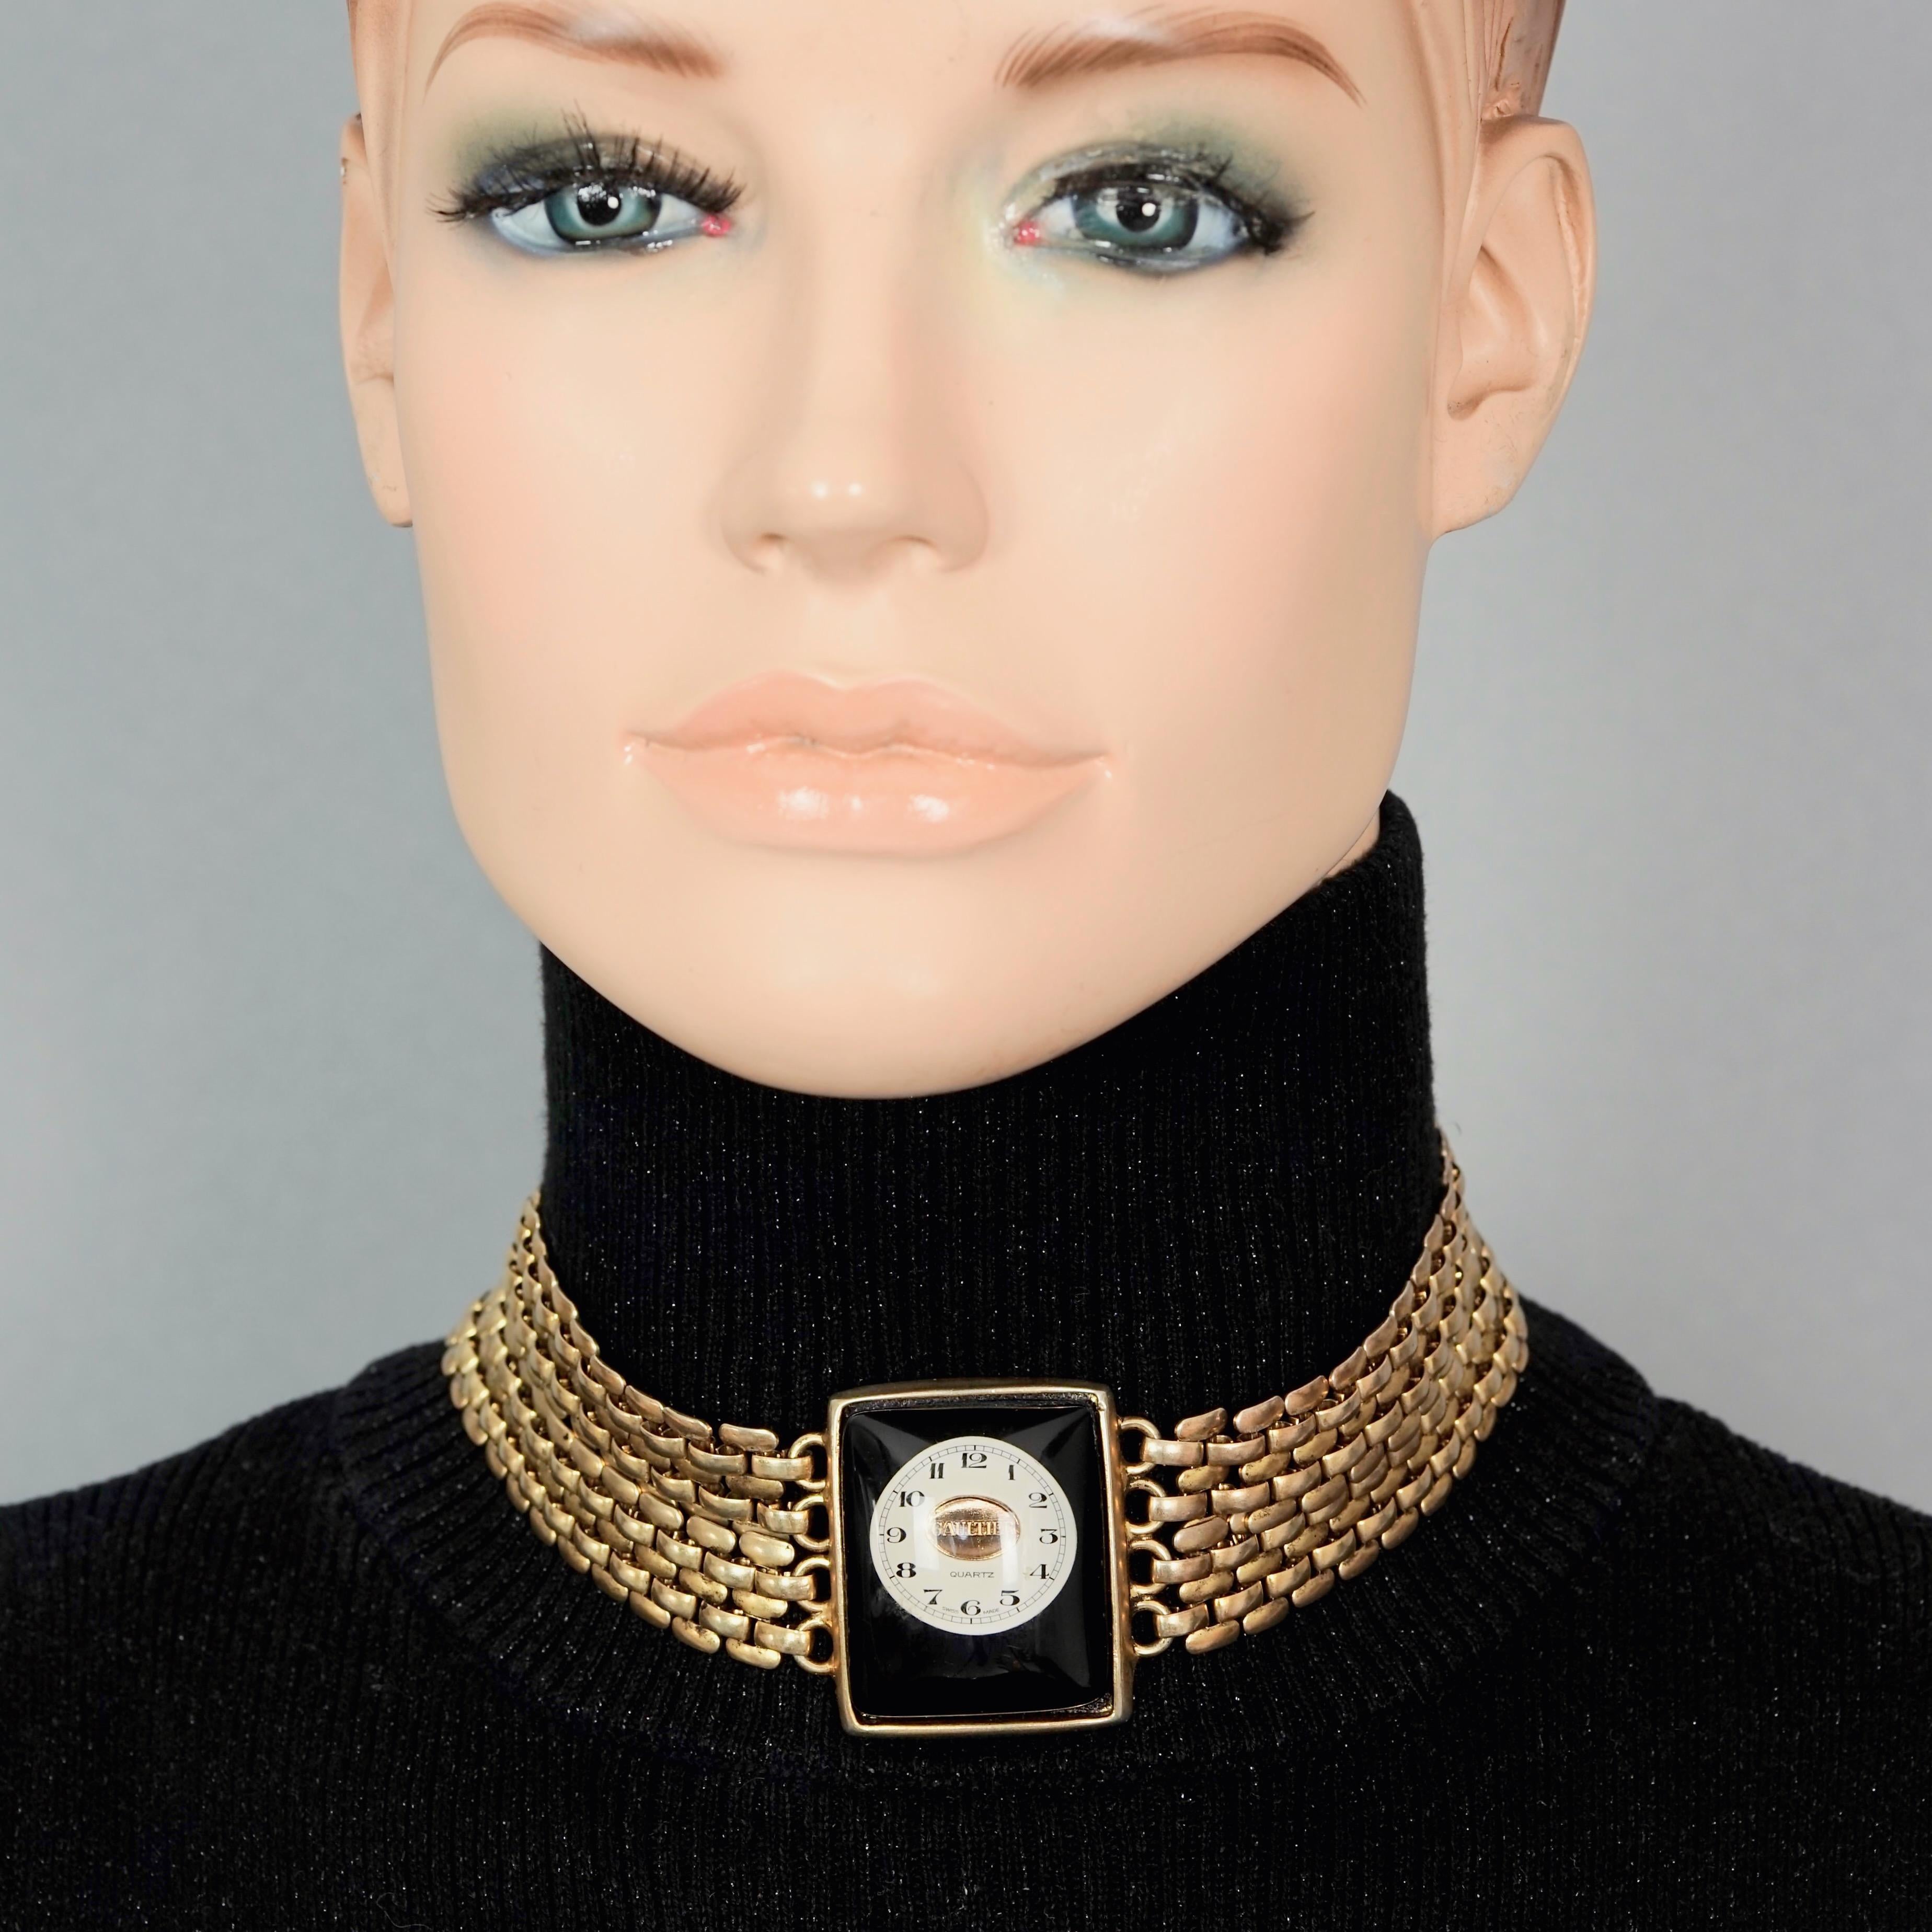 Vintage JEAN PAUL GAULTIER Steampunk Watch Face Lucite Choker Necklace

Measurements:
Height: 1.65 inches (4.2 cm)
Wearable Length: 12.99 inches (33 cm) to 15.75 inches (40 cm)

Features:
- 100% Authentic JEAN PAUL GAULTIER.
- Steampunk, lucite and